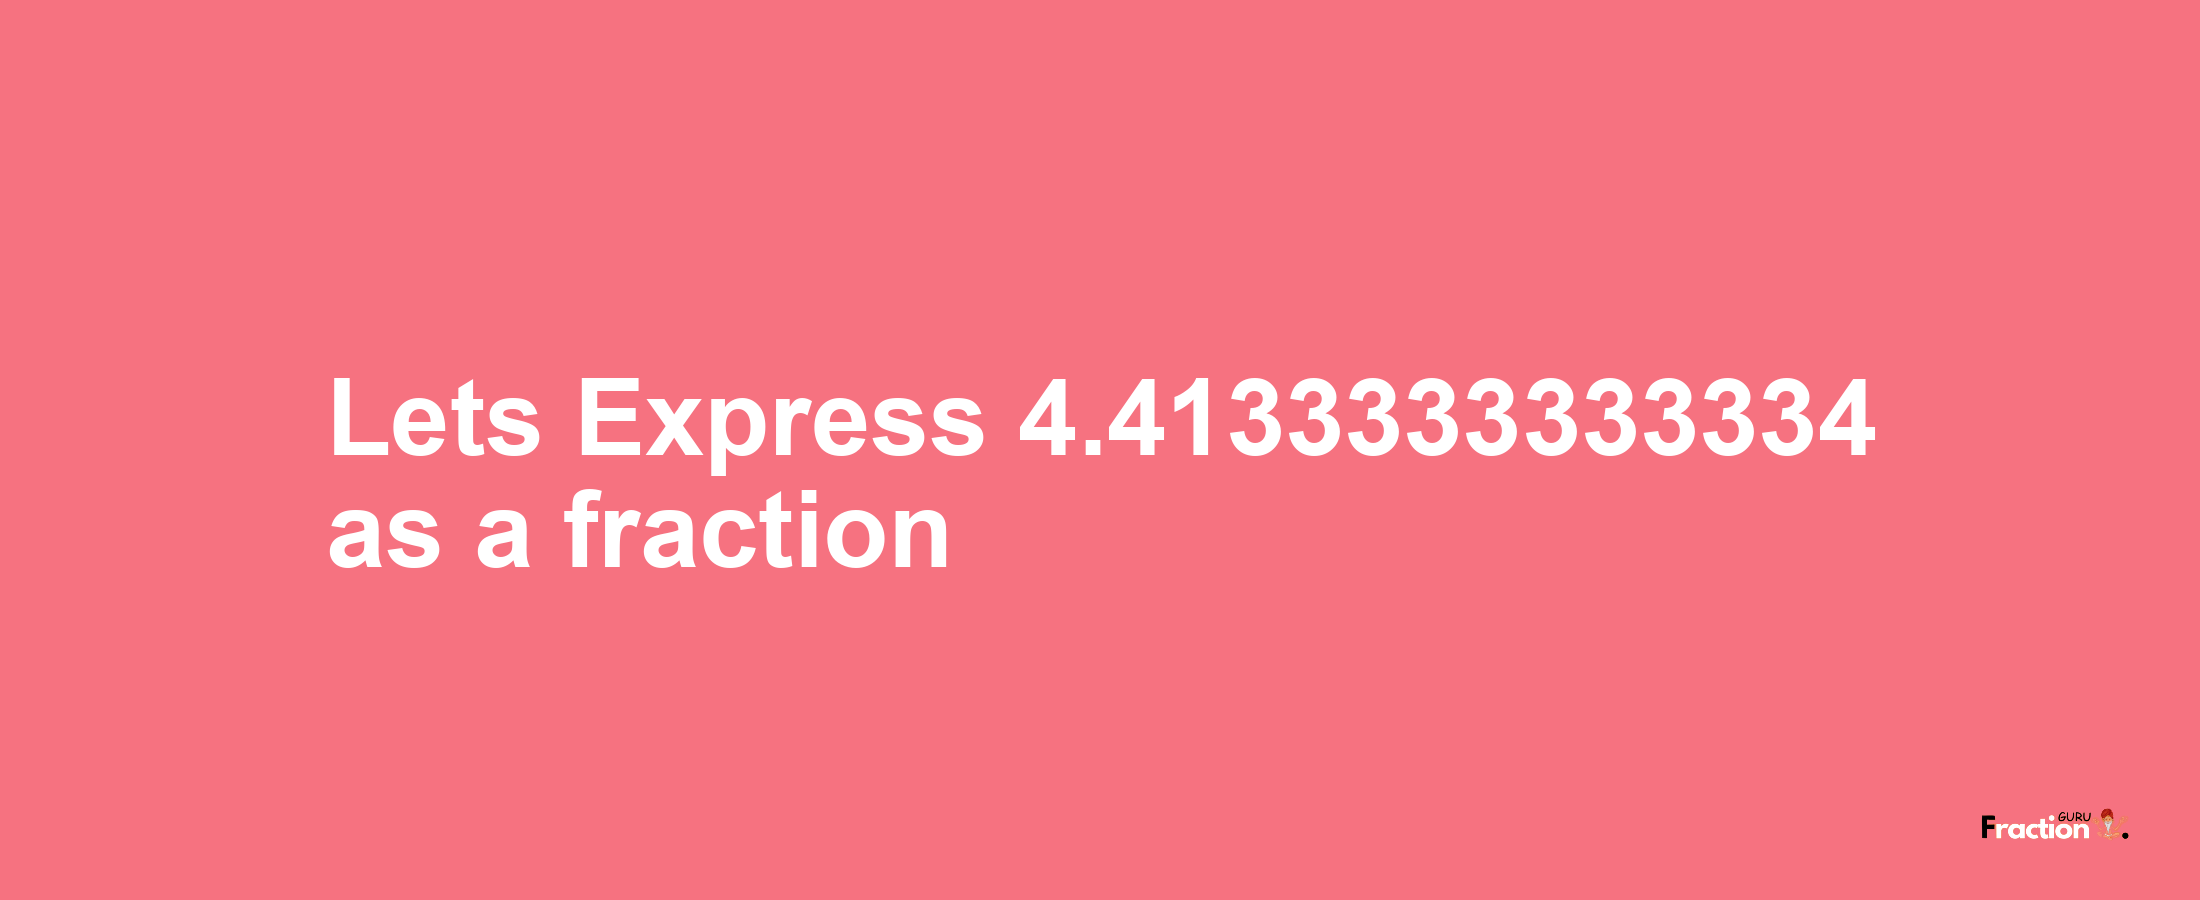 Lets Express 4.4133333333334 as afraction